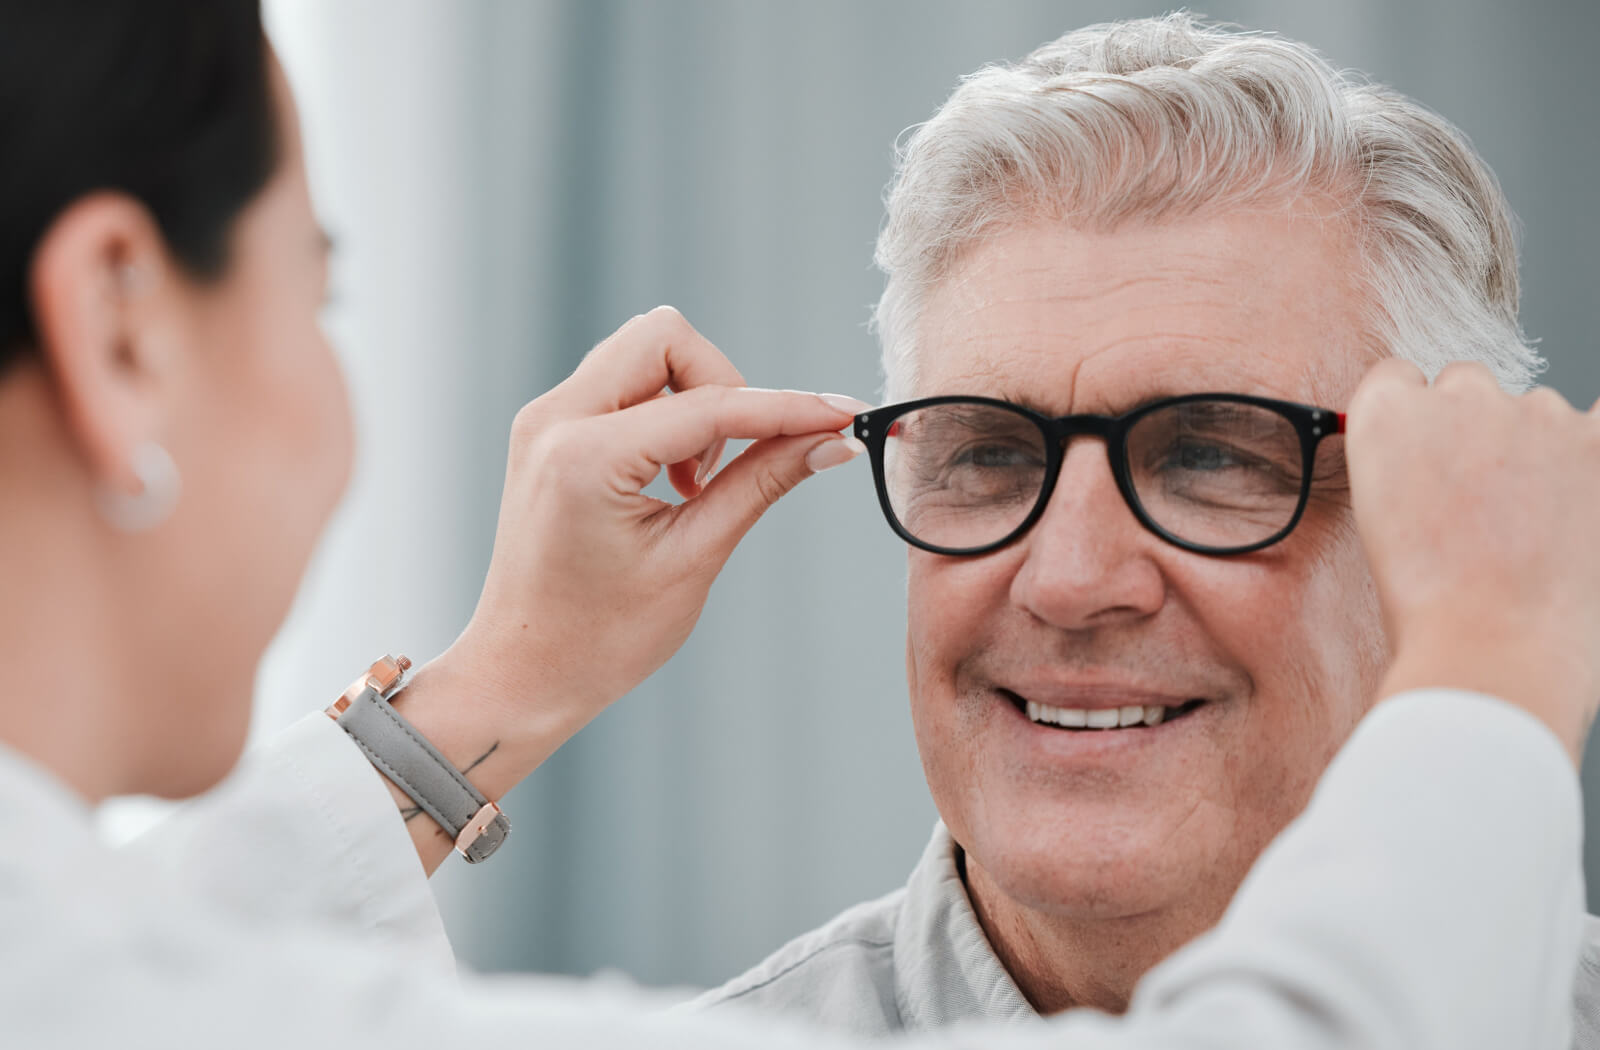 A senior man being fitted with prescription glasses by a female optometrist.